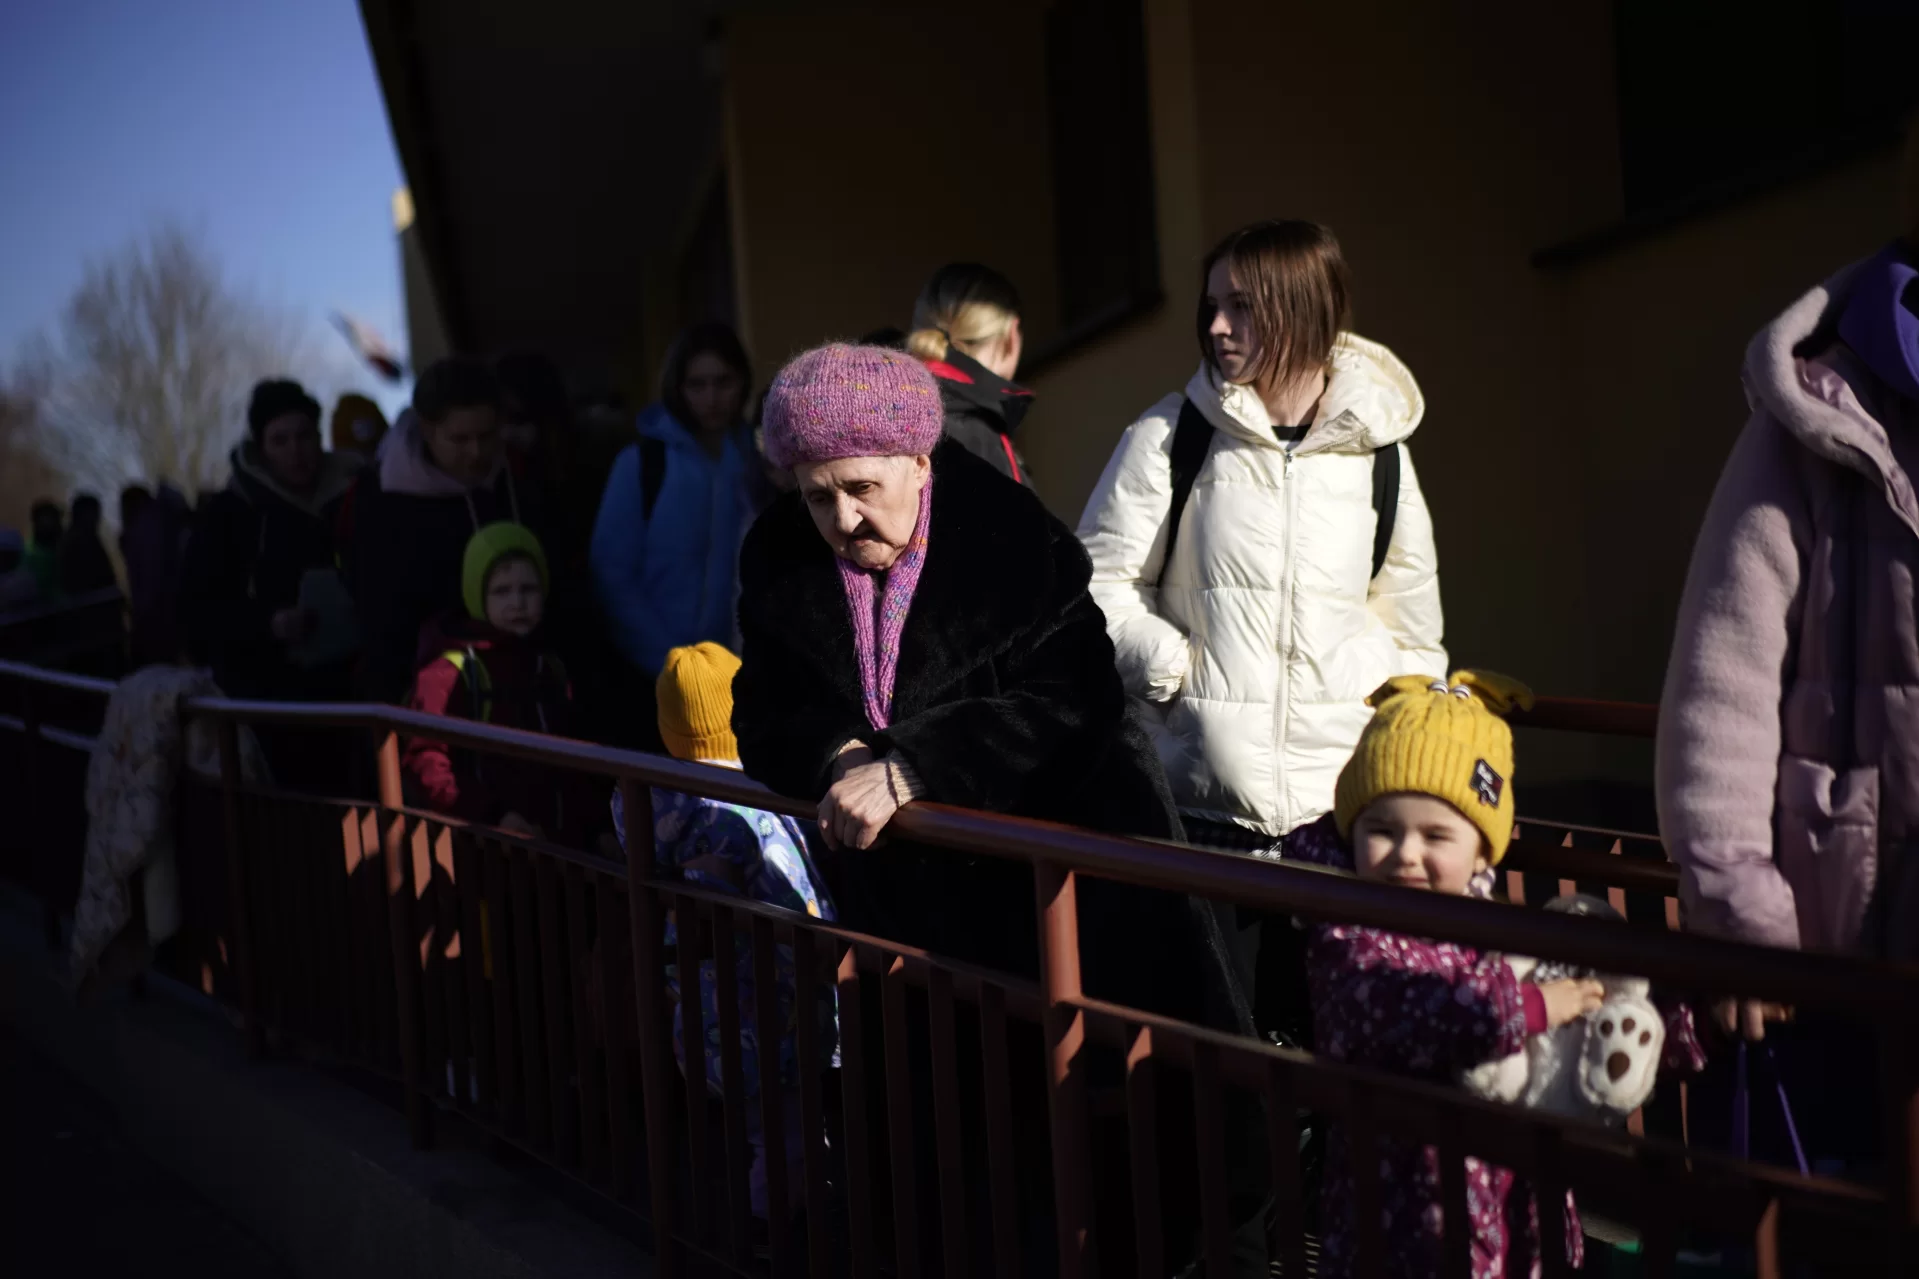 A Ukrainian woman stands as other refugees arrive from Lviv to Przemysl train station, southeastern Poland, on Friday, March 11, 2022. Thousands of people have been killed and more than 2.3 million have fled the country since Russian troops crossed into Ukraine on Feb. 24. (AP Photo/Daniel Cole)